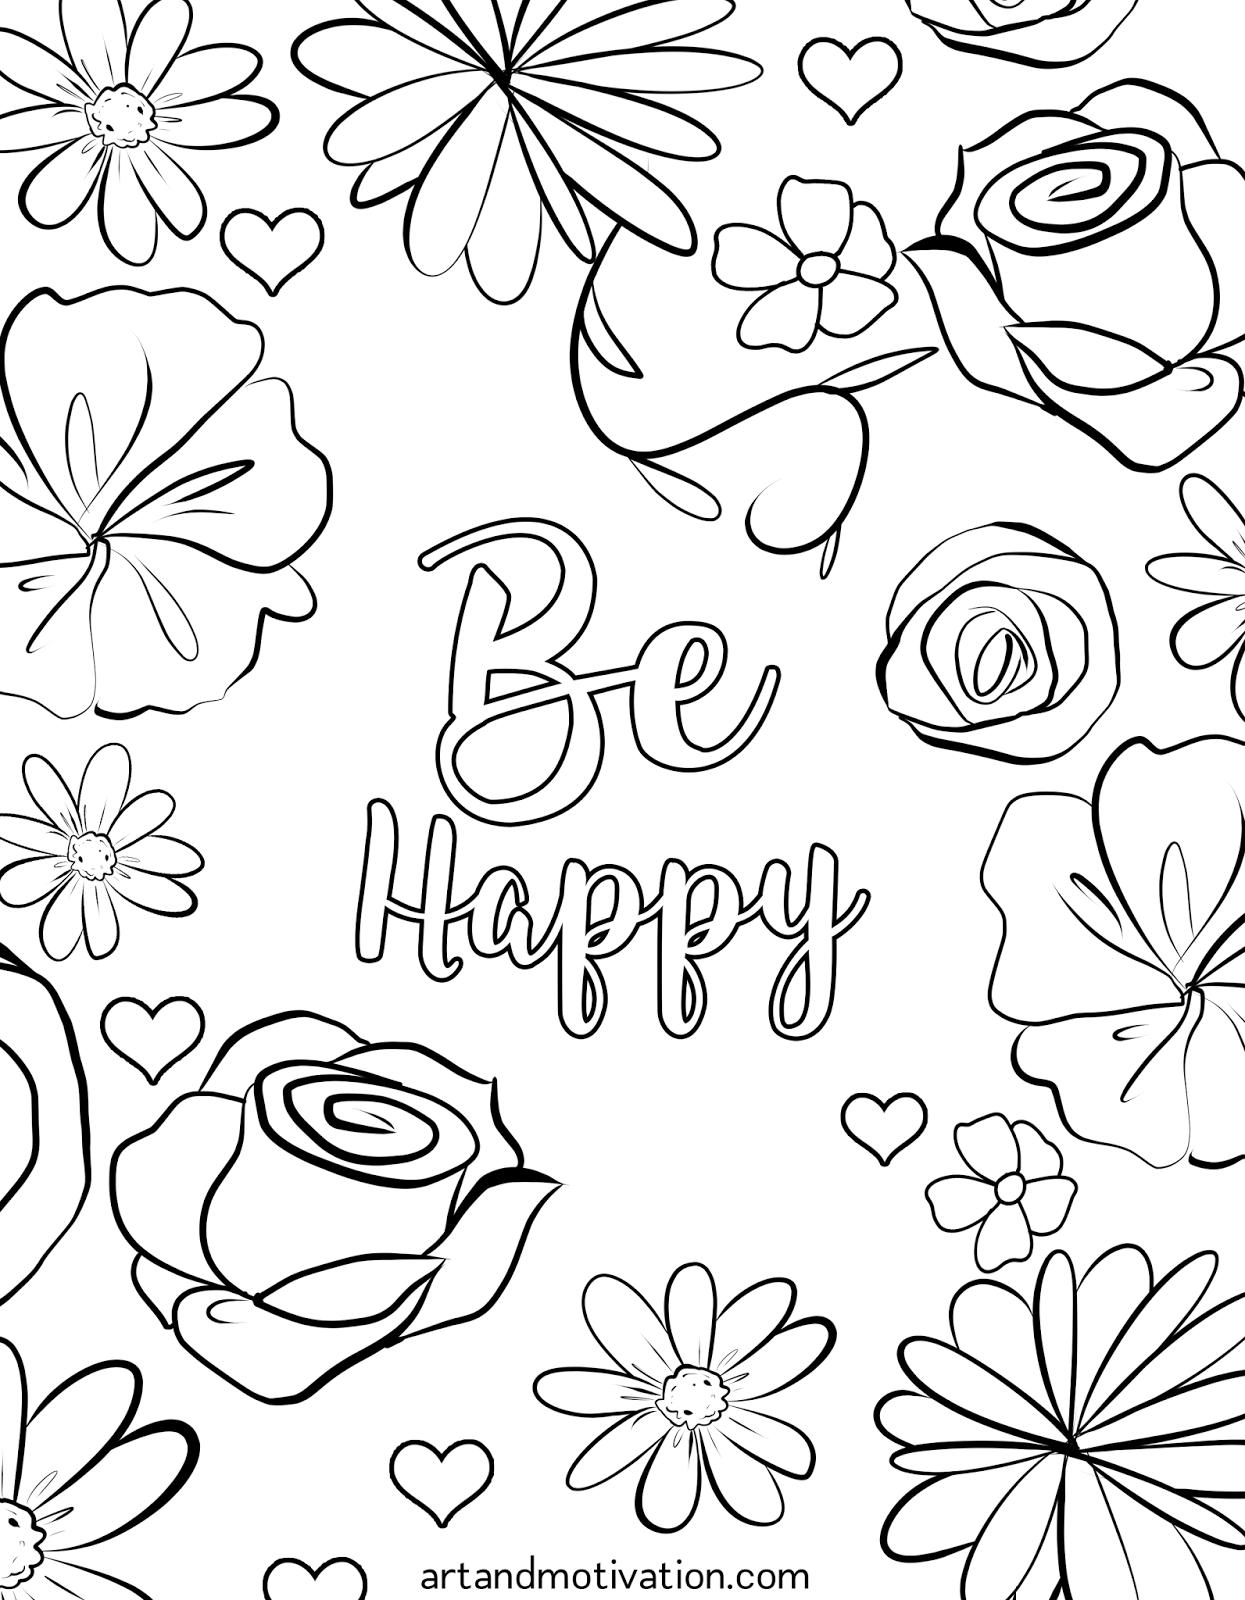 Inspirational adult coloring book adult coloring book adult coloring books easy coloring pages free coloring pages printable coloring pages